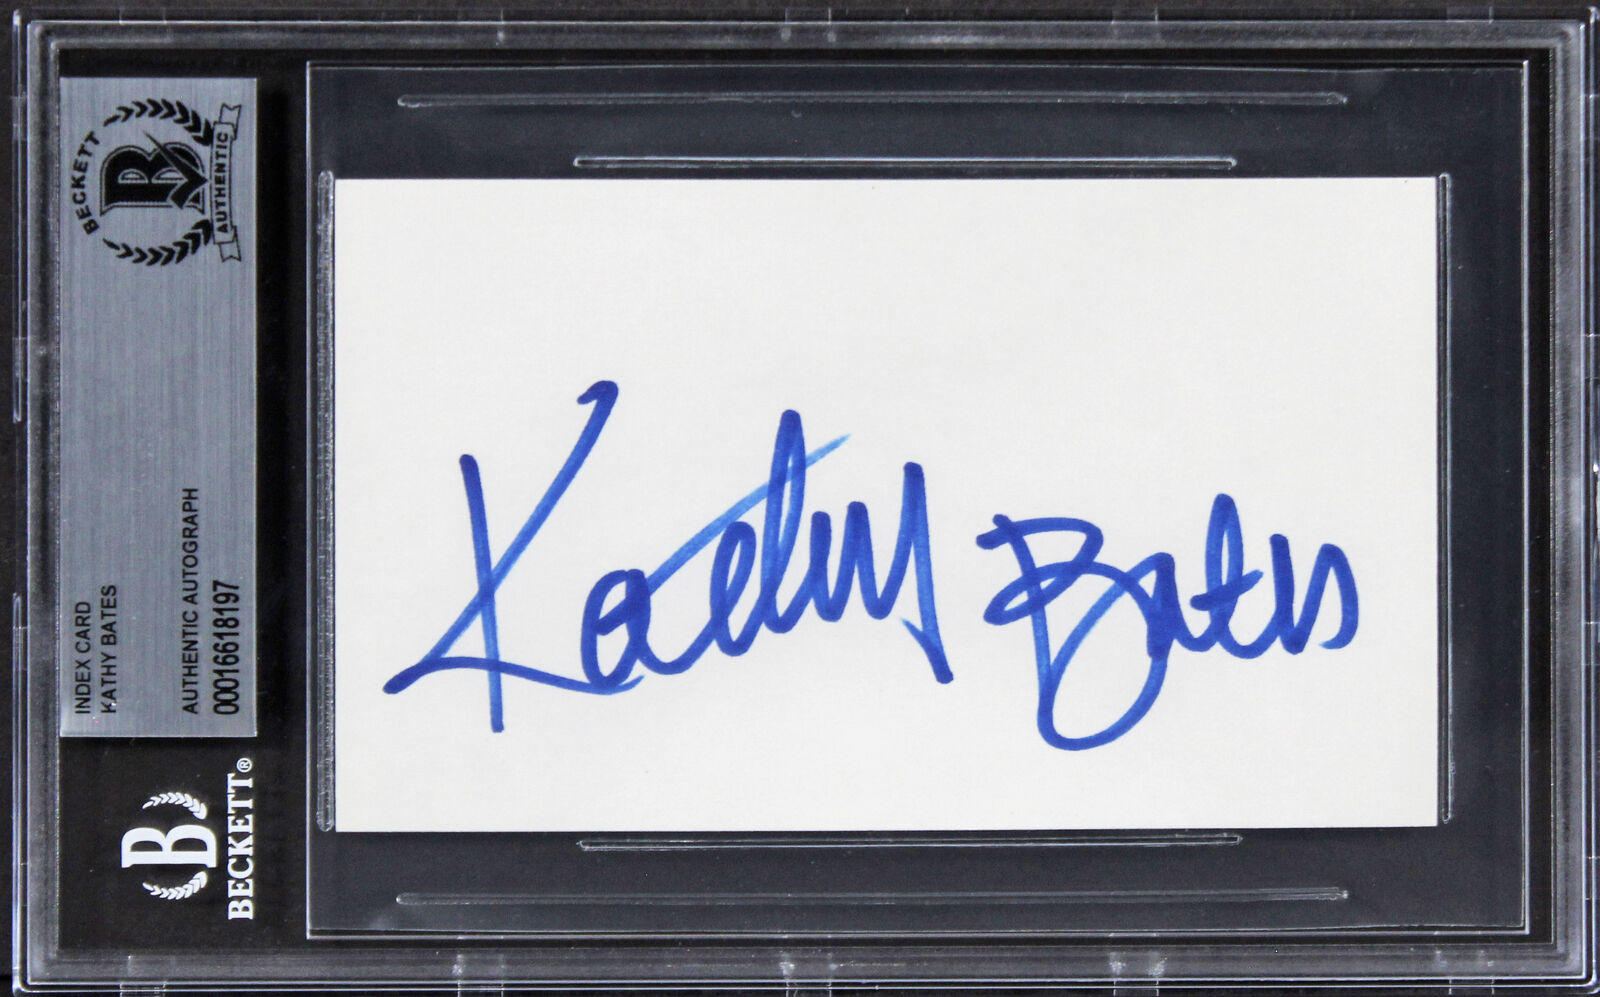 Kathy Bates Misery Authentic Signed 3x5 Index Card Autographed BAS Slabbed